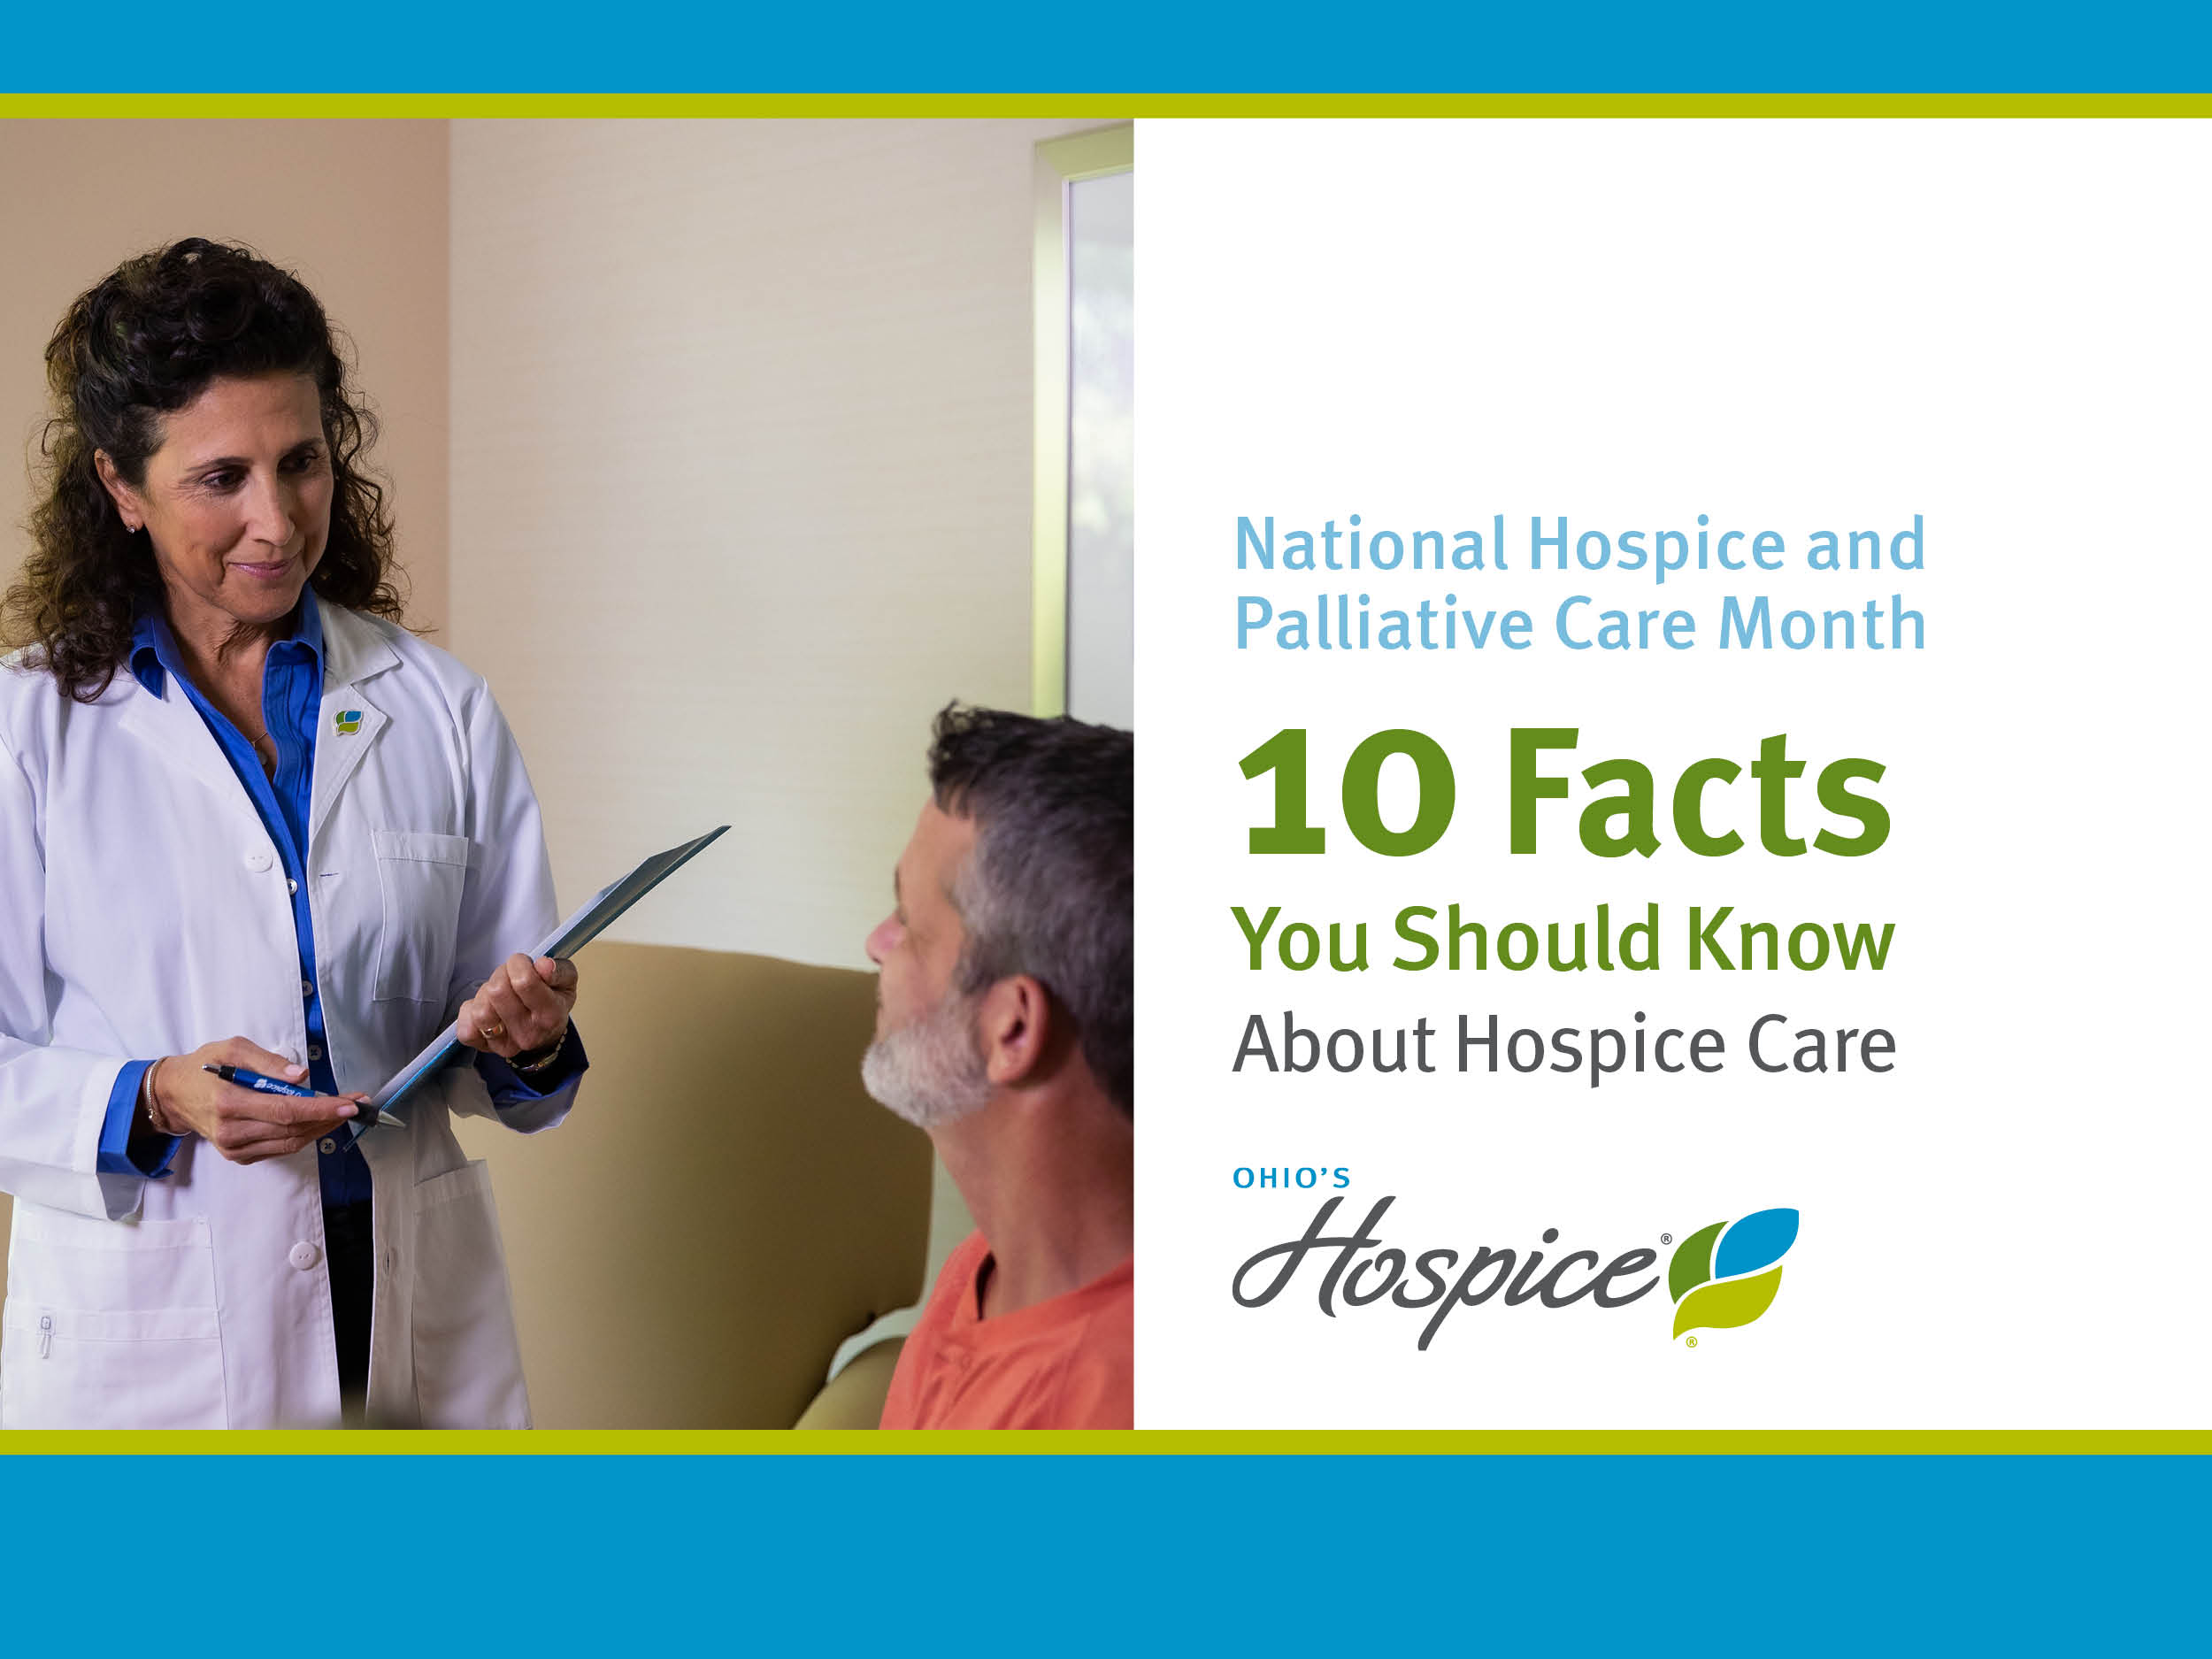 10 facts you should know about hospice care. Ohio's Hospice